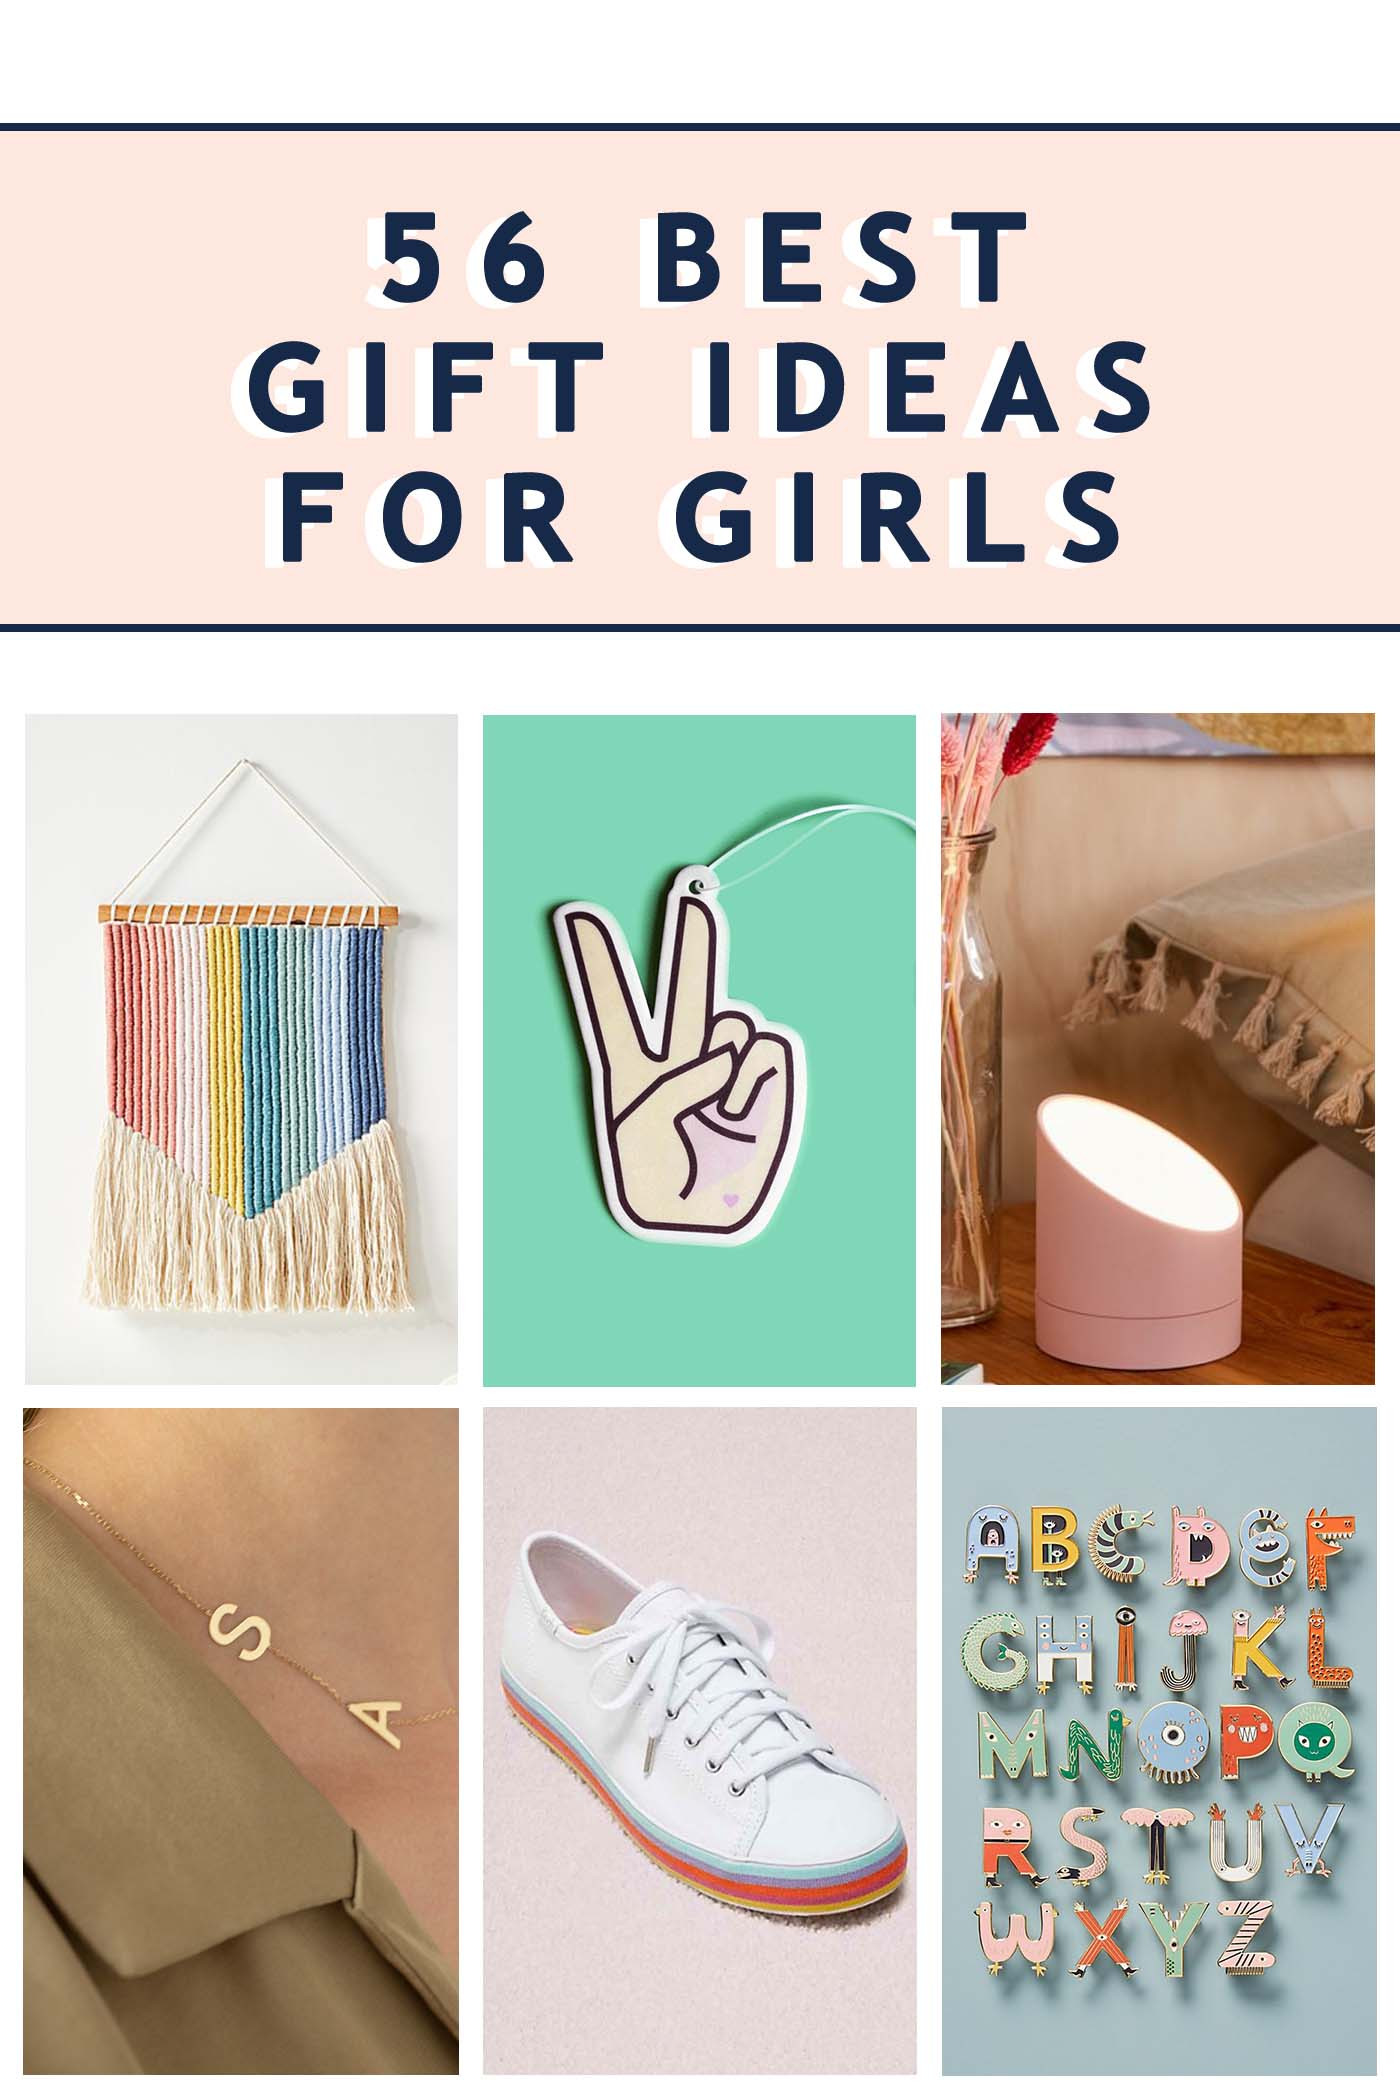 Best Gift Ideas For Girlfriend
 Gifts for Girls 56 Best Gift Ideas for Girls Sugar & Cloth